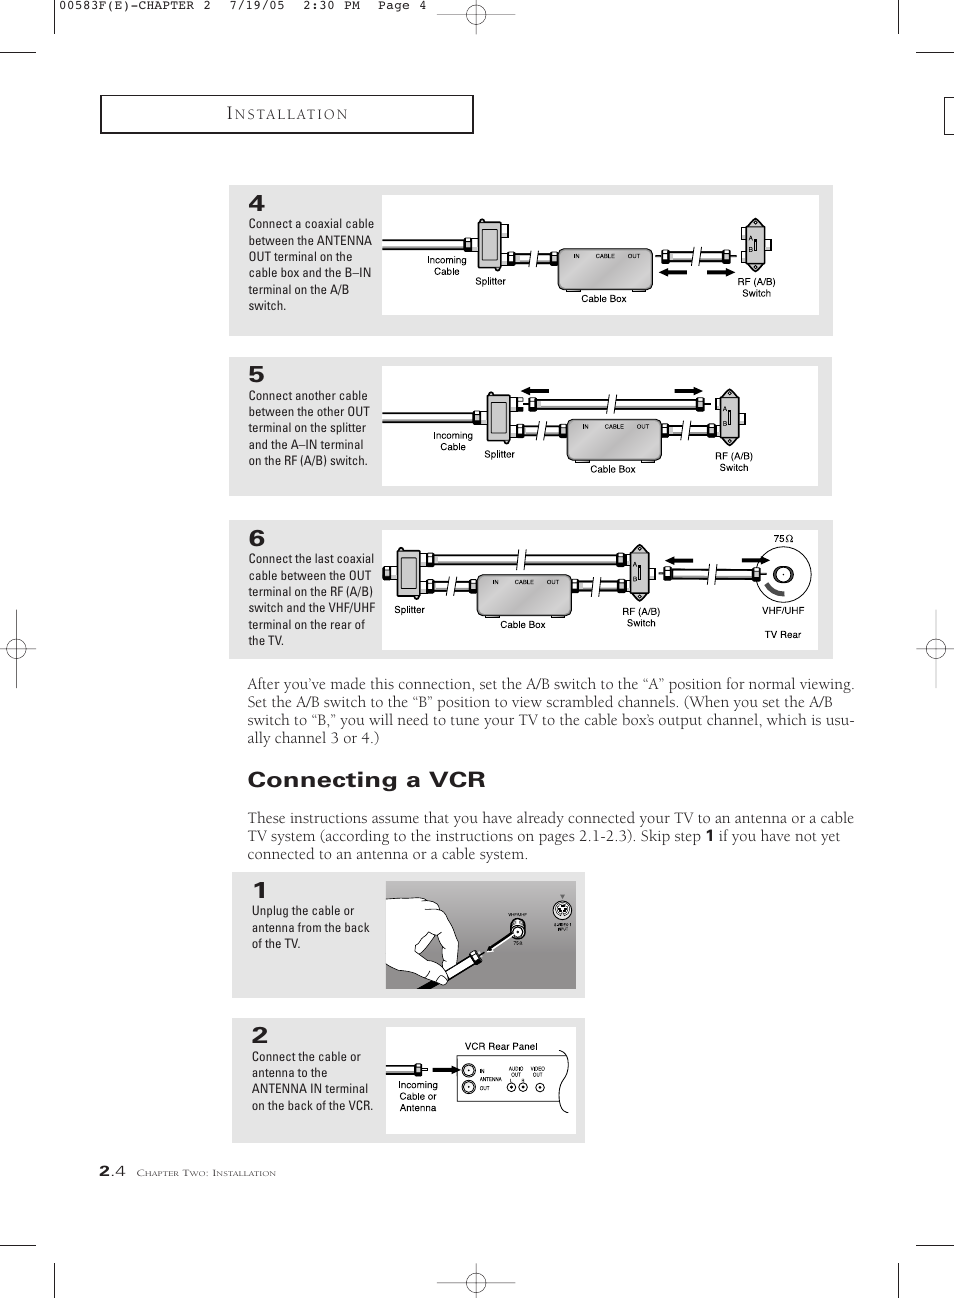 Connecting a vcr | Samsung Tantus PCK 6115R User Manual | Page 18 / 58